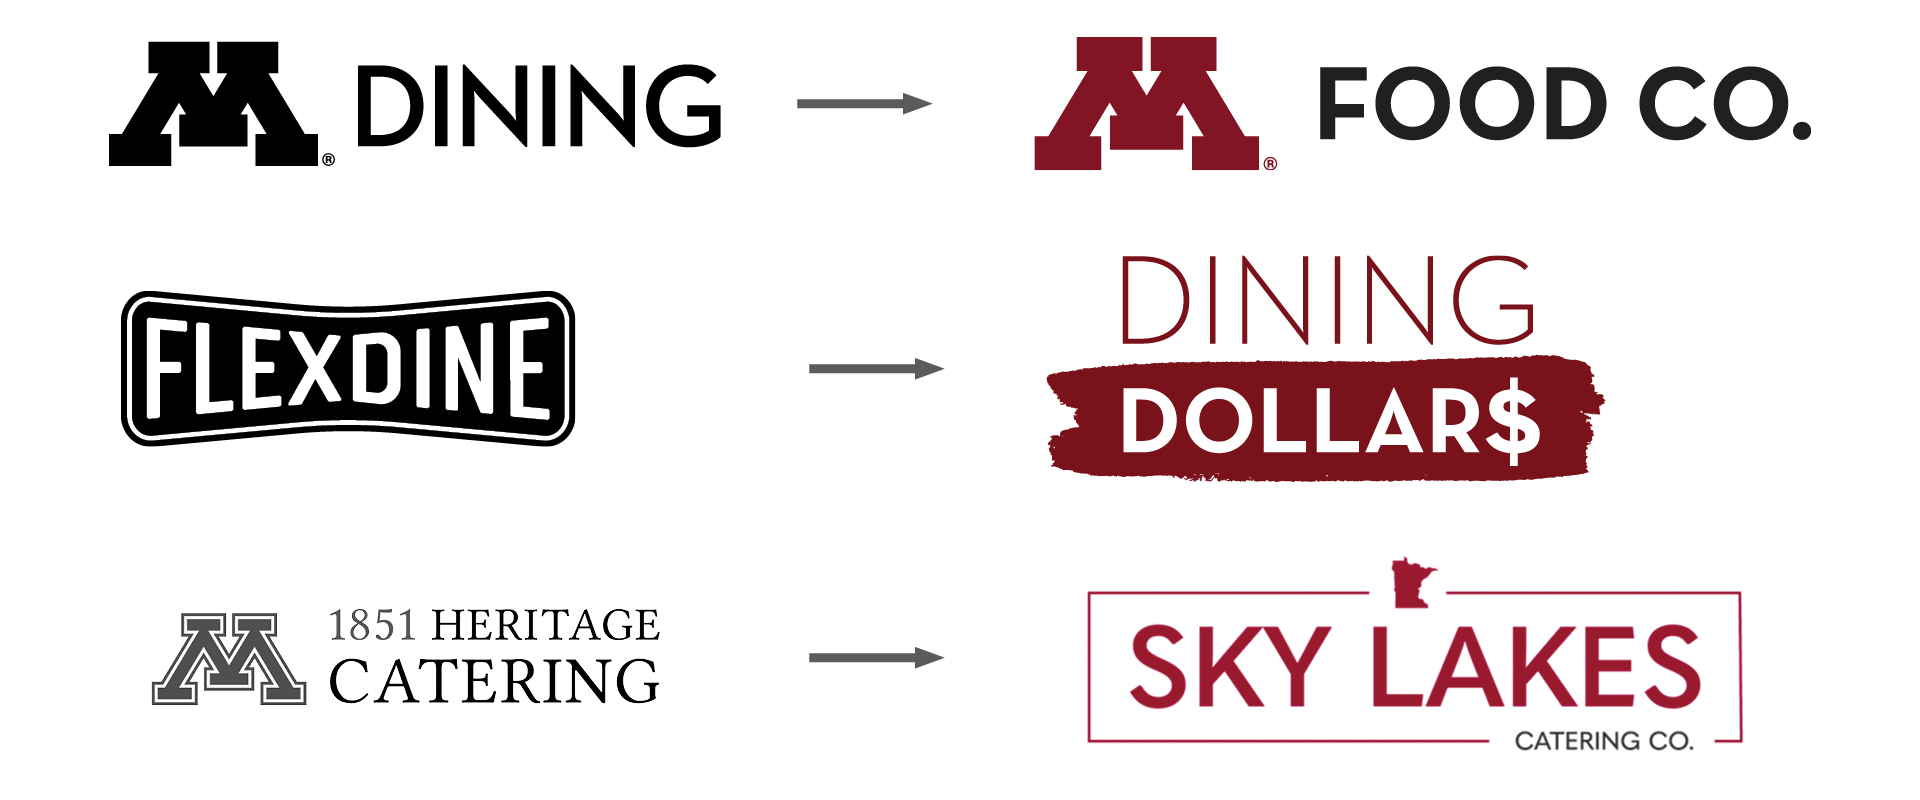 Graphic showing M Dining transitioning to M Food Co., FlexDine transitioning to Dining Dollars, and 1851 Heritage Catering transitioning to Sky Lakes Catering Co.